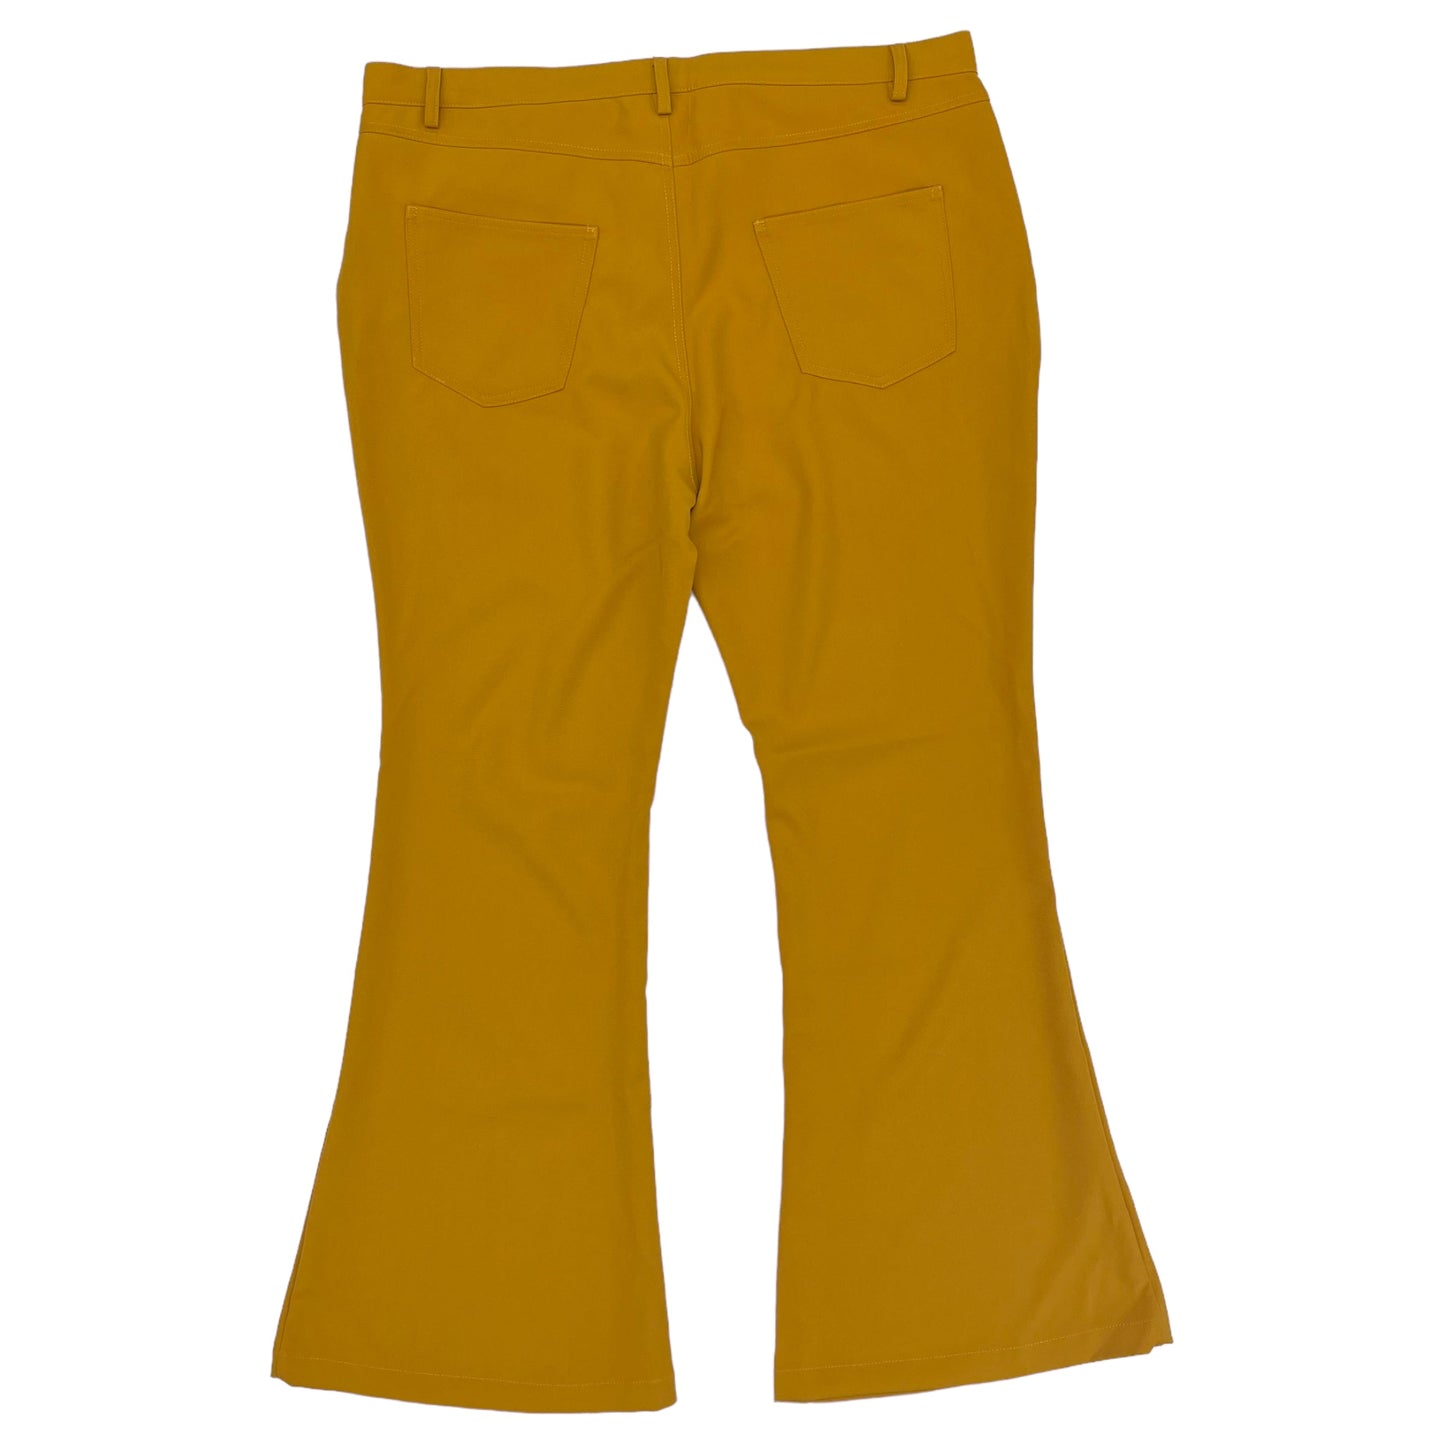 Pants Chinos & Khakis By Clothes Mentor  Size: Xl